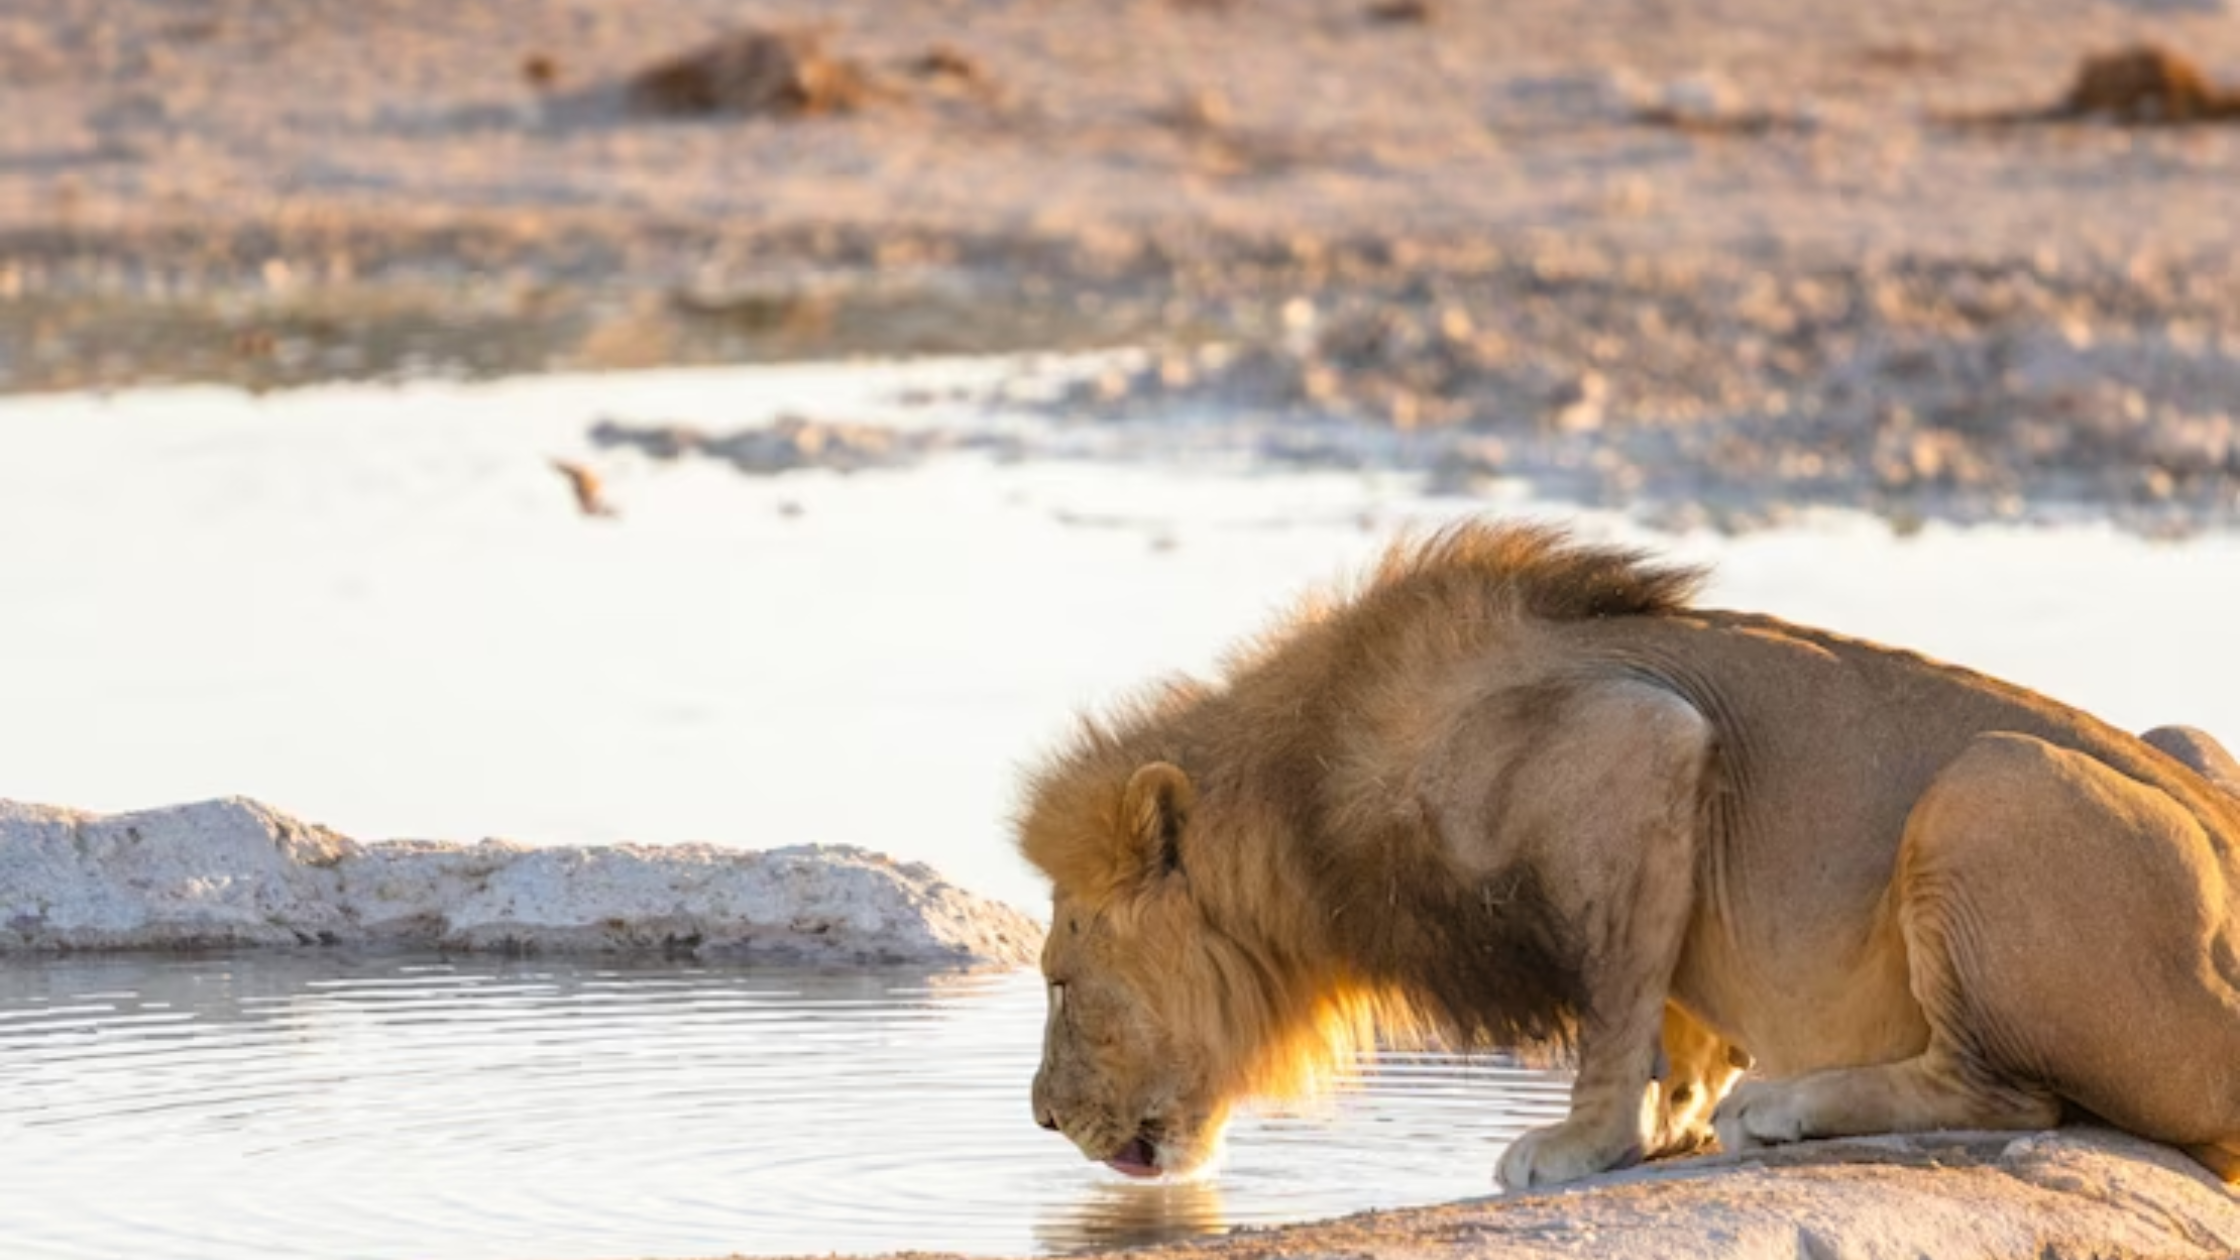 What Animals Eat Lions